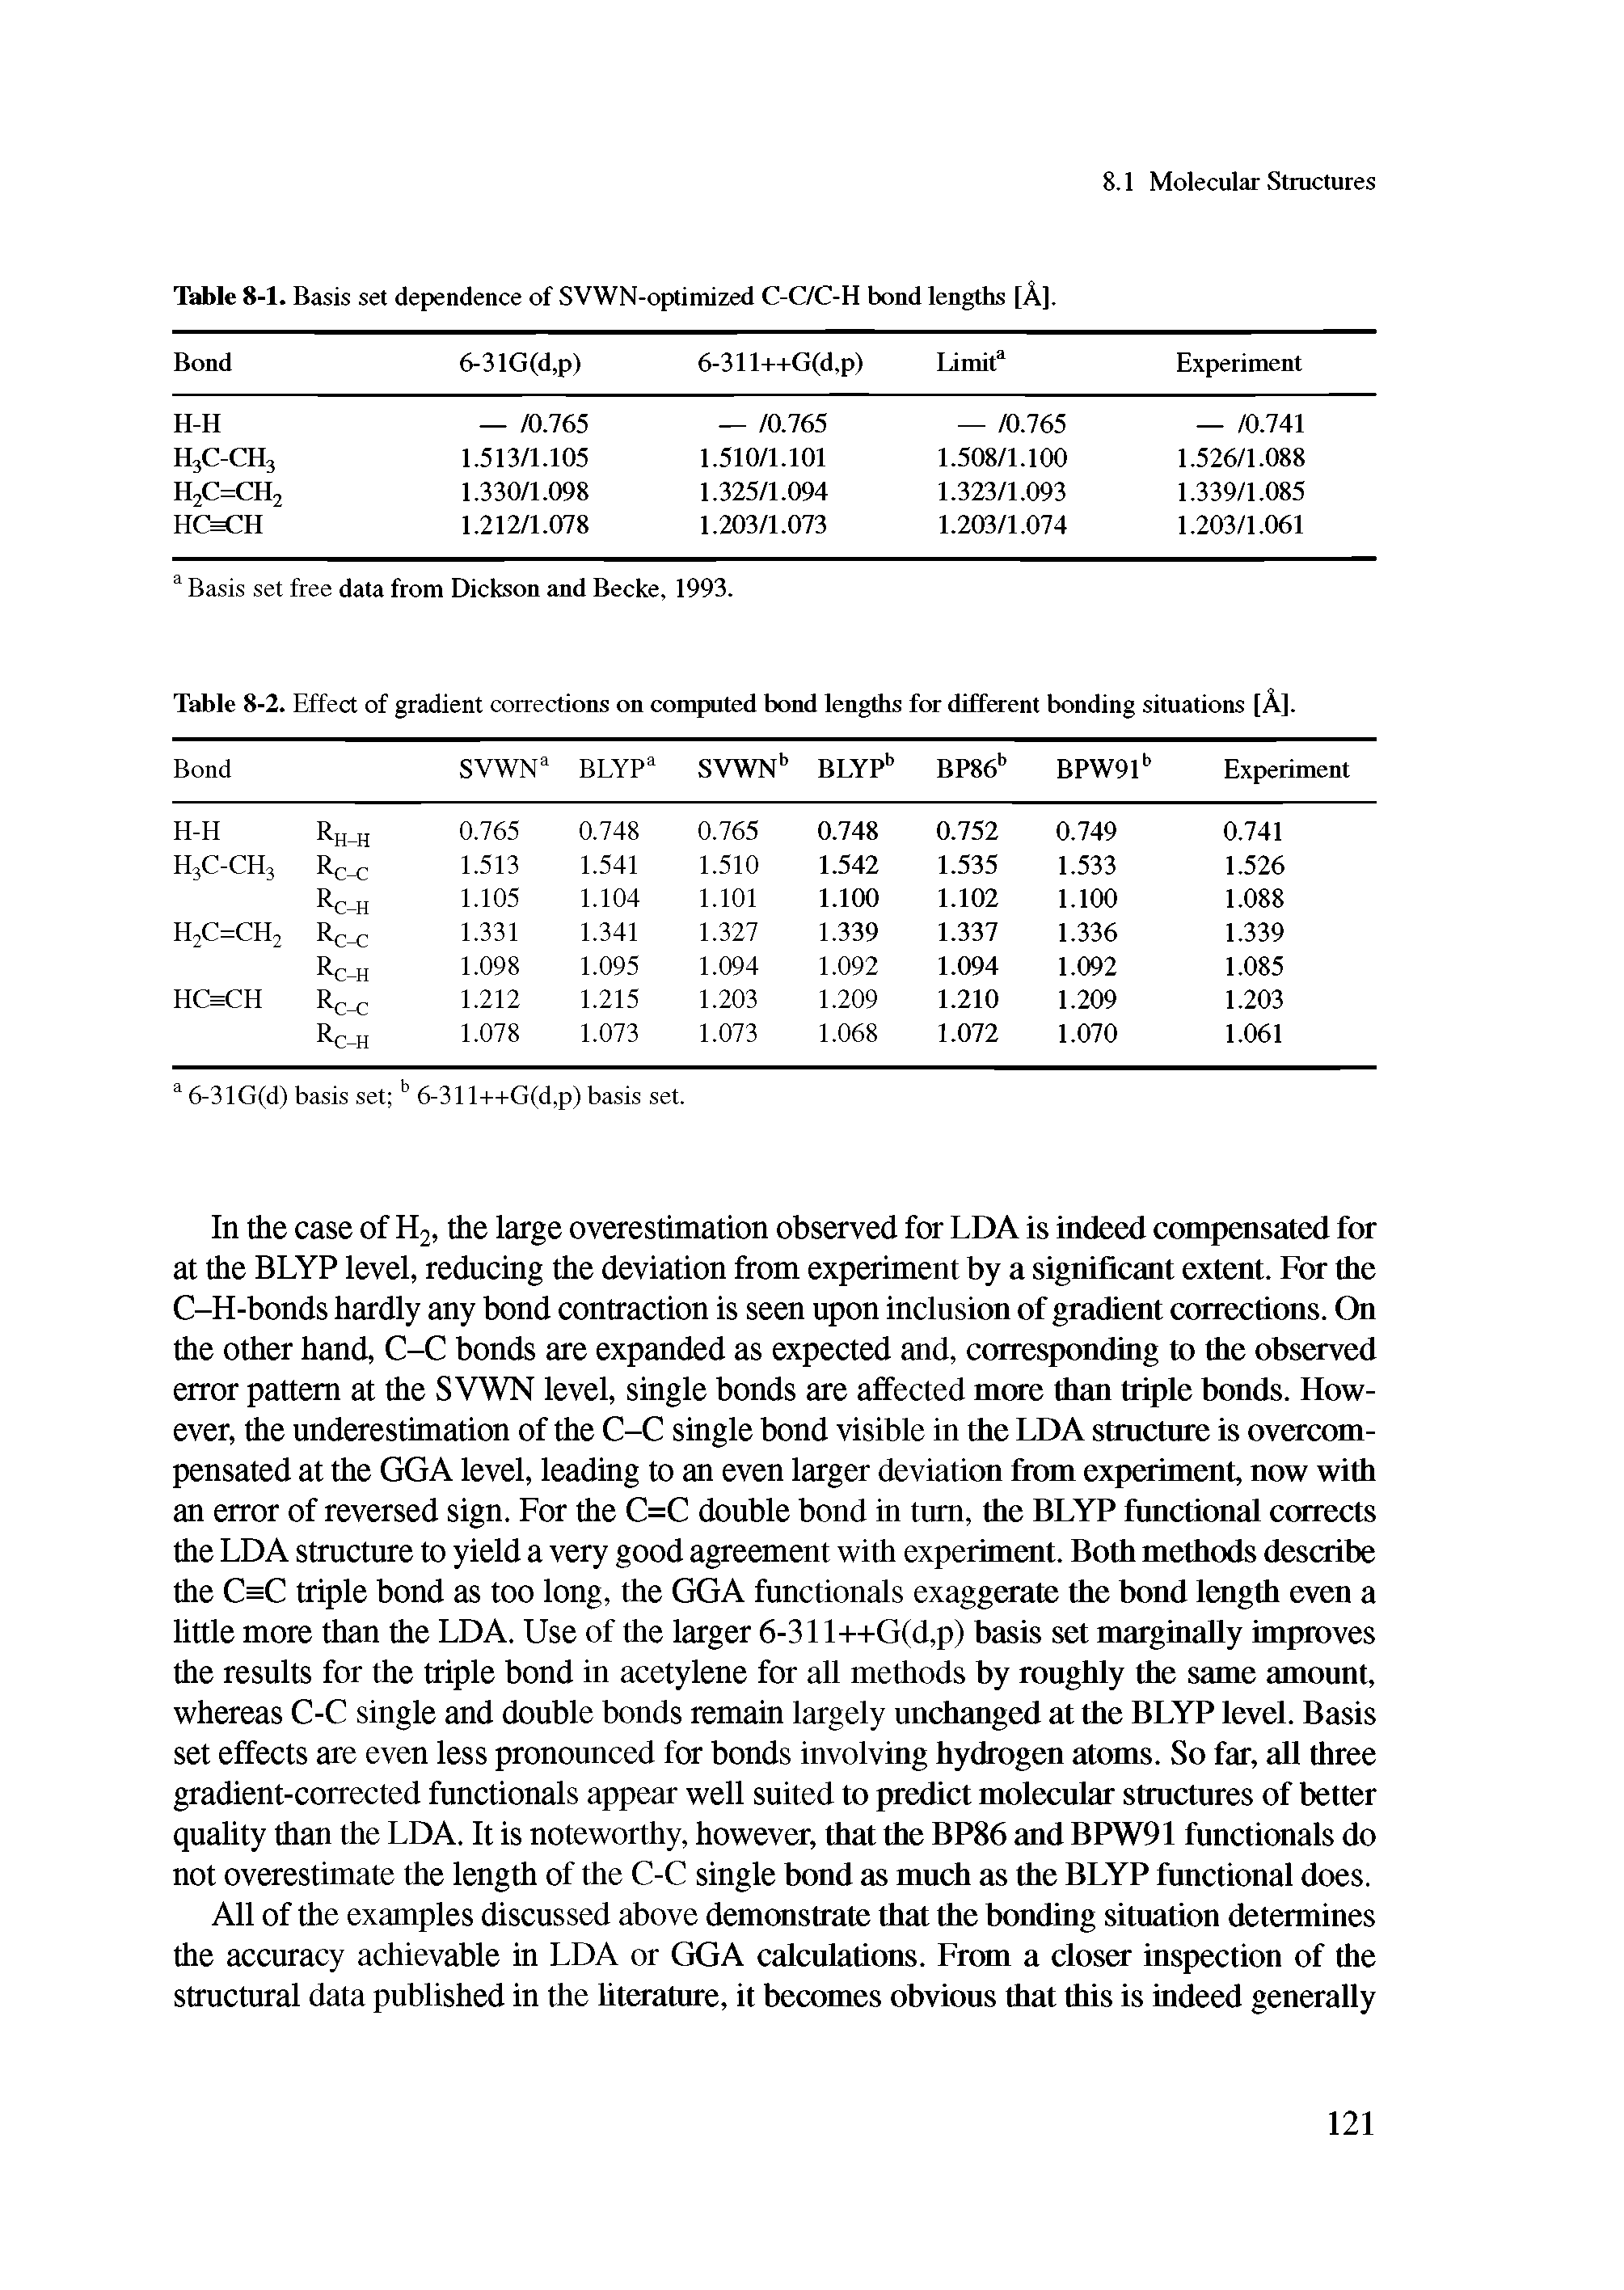 Table 8-2. Effect of gradient corrections on computed bond lengths for different bonding situations [A].